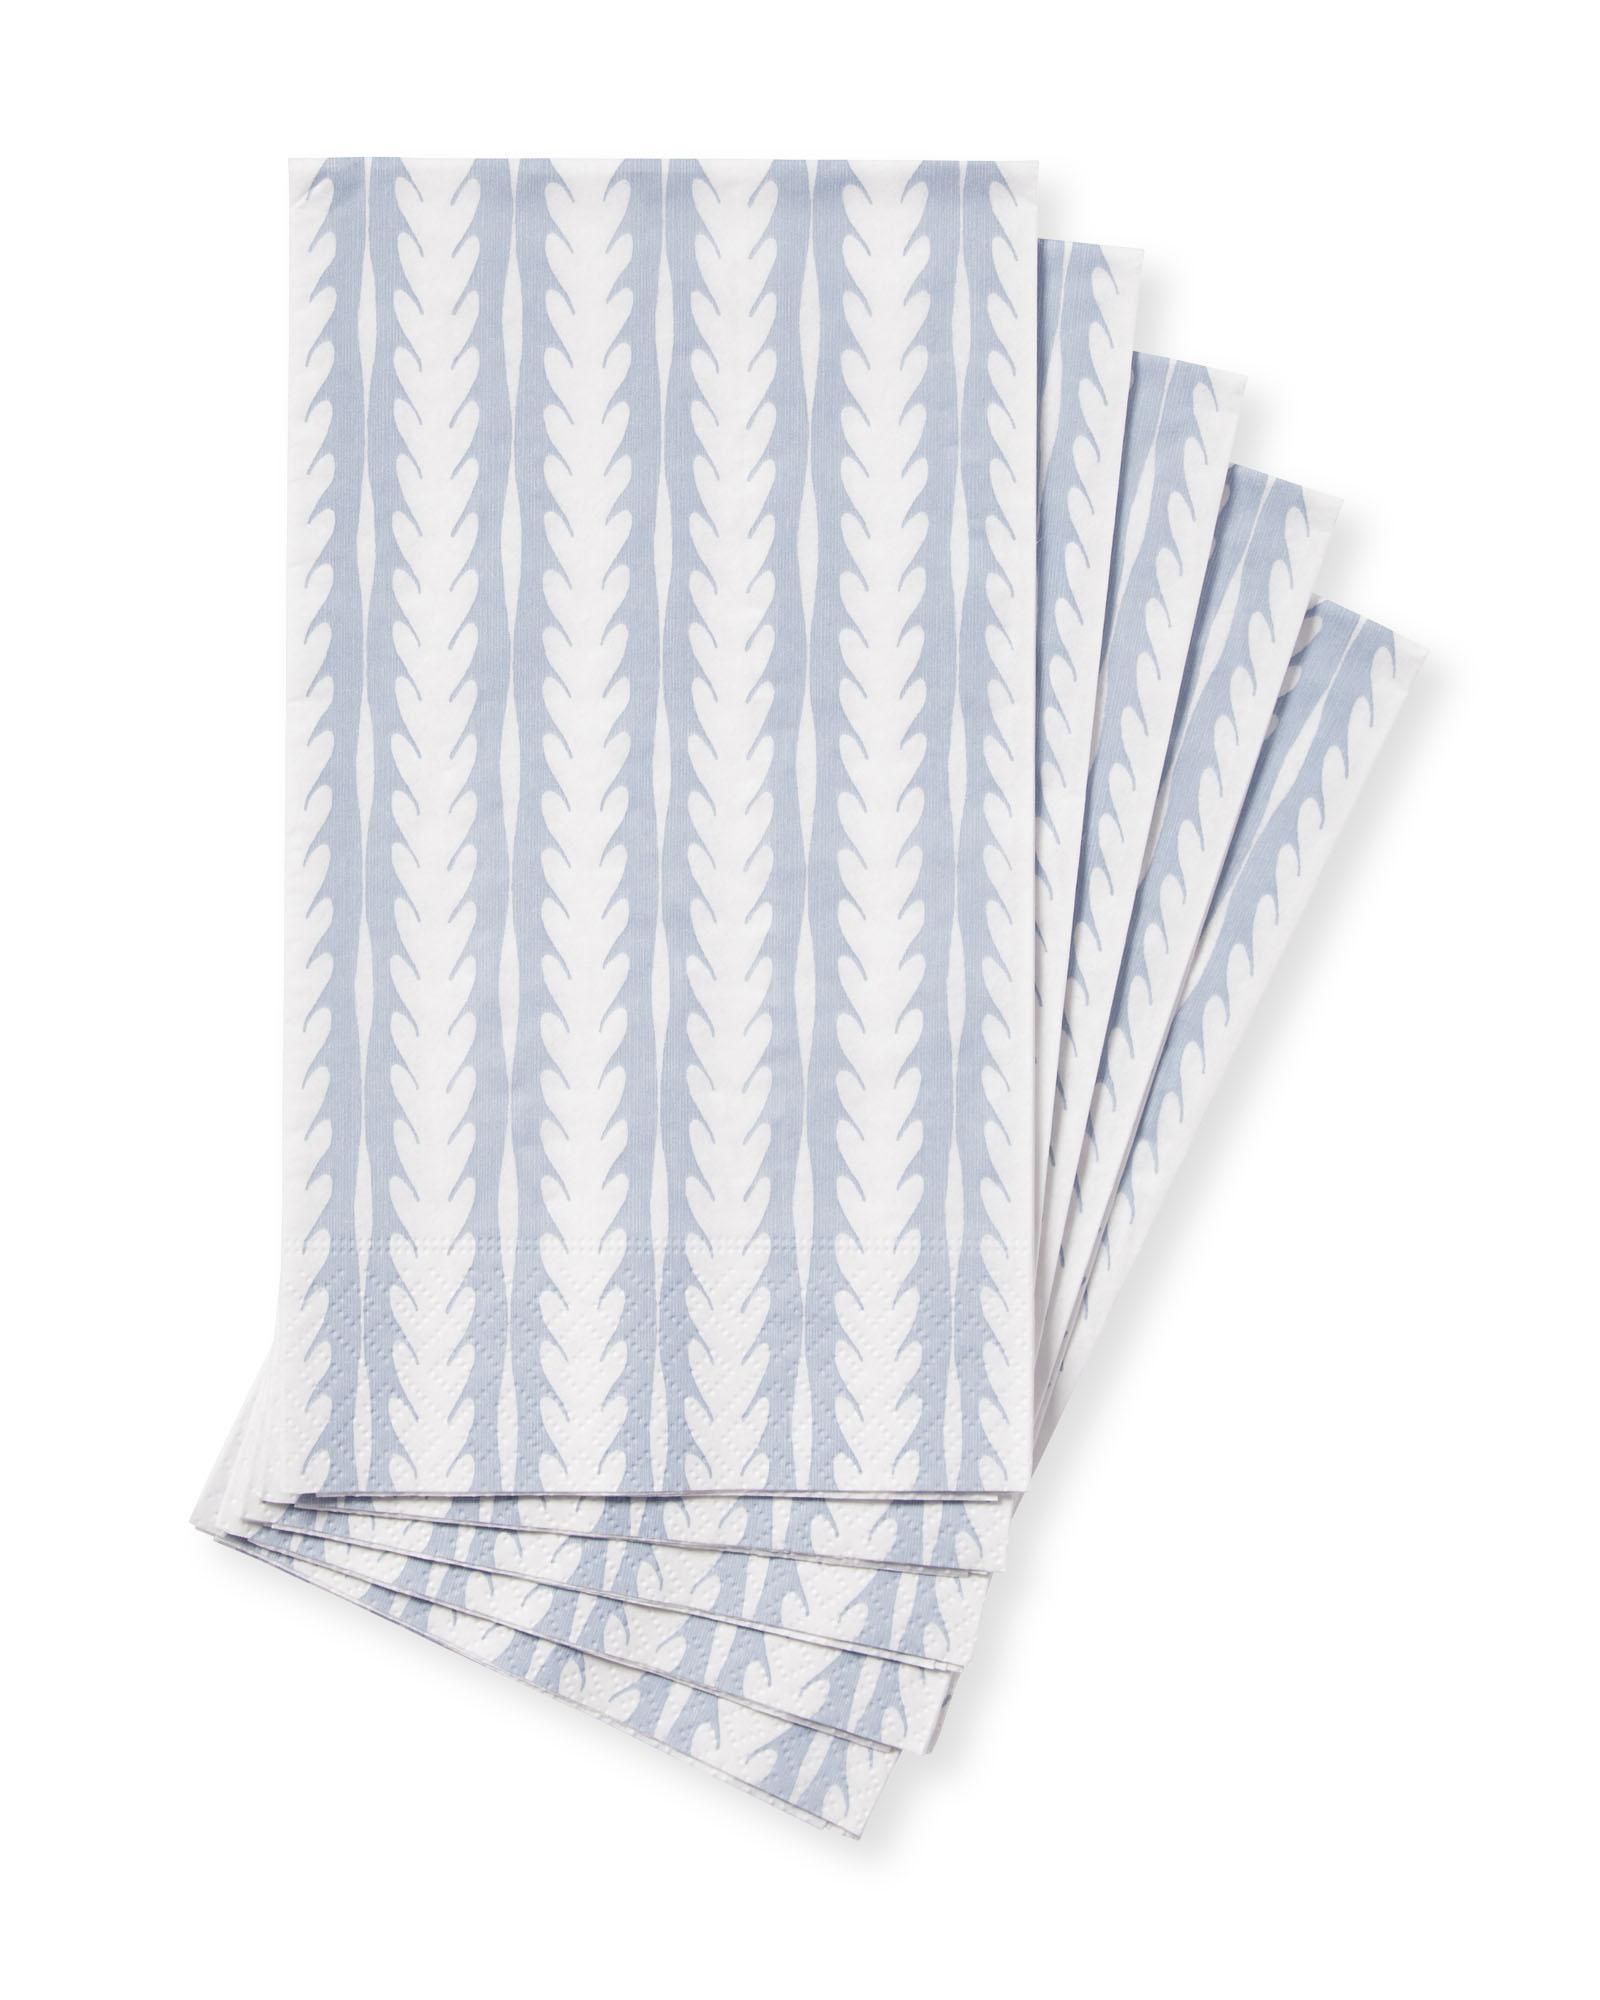 Oceana Napkins, Serena & Lily Summer Home, Serena & Lily Coastal, Home Finds, Napkins, Mothers Day | Serena and Lily